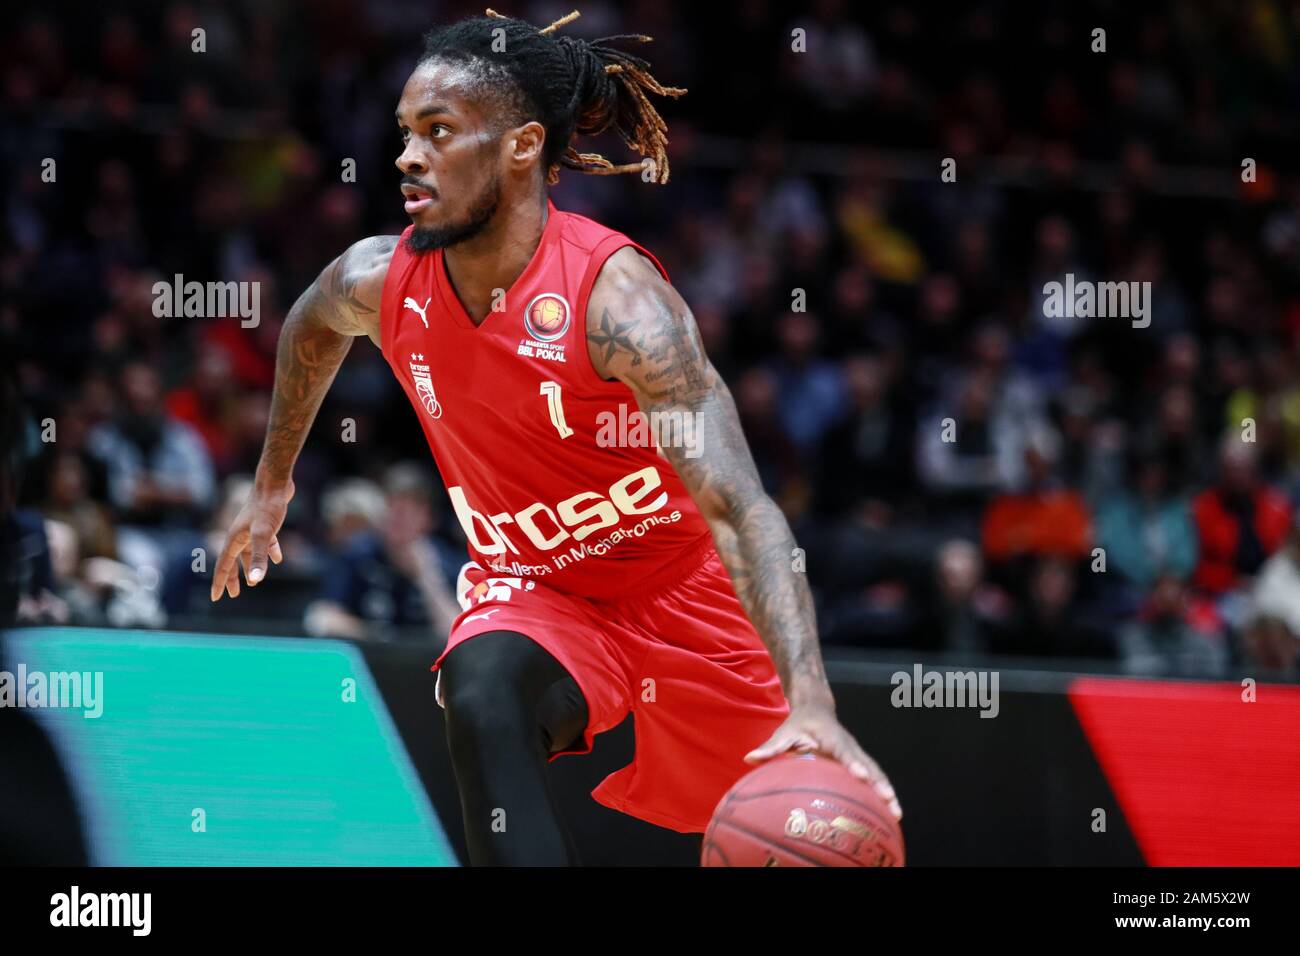 Braunschweig, Germany, December 14, 2019: Paris Lee of Brose Bamberg in action during the Basketball BBL Pokal match between Braunschweig and Bamberg Stock Photo